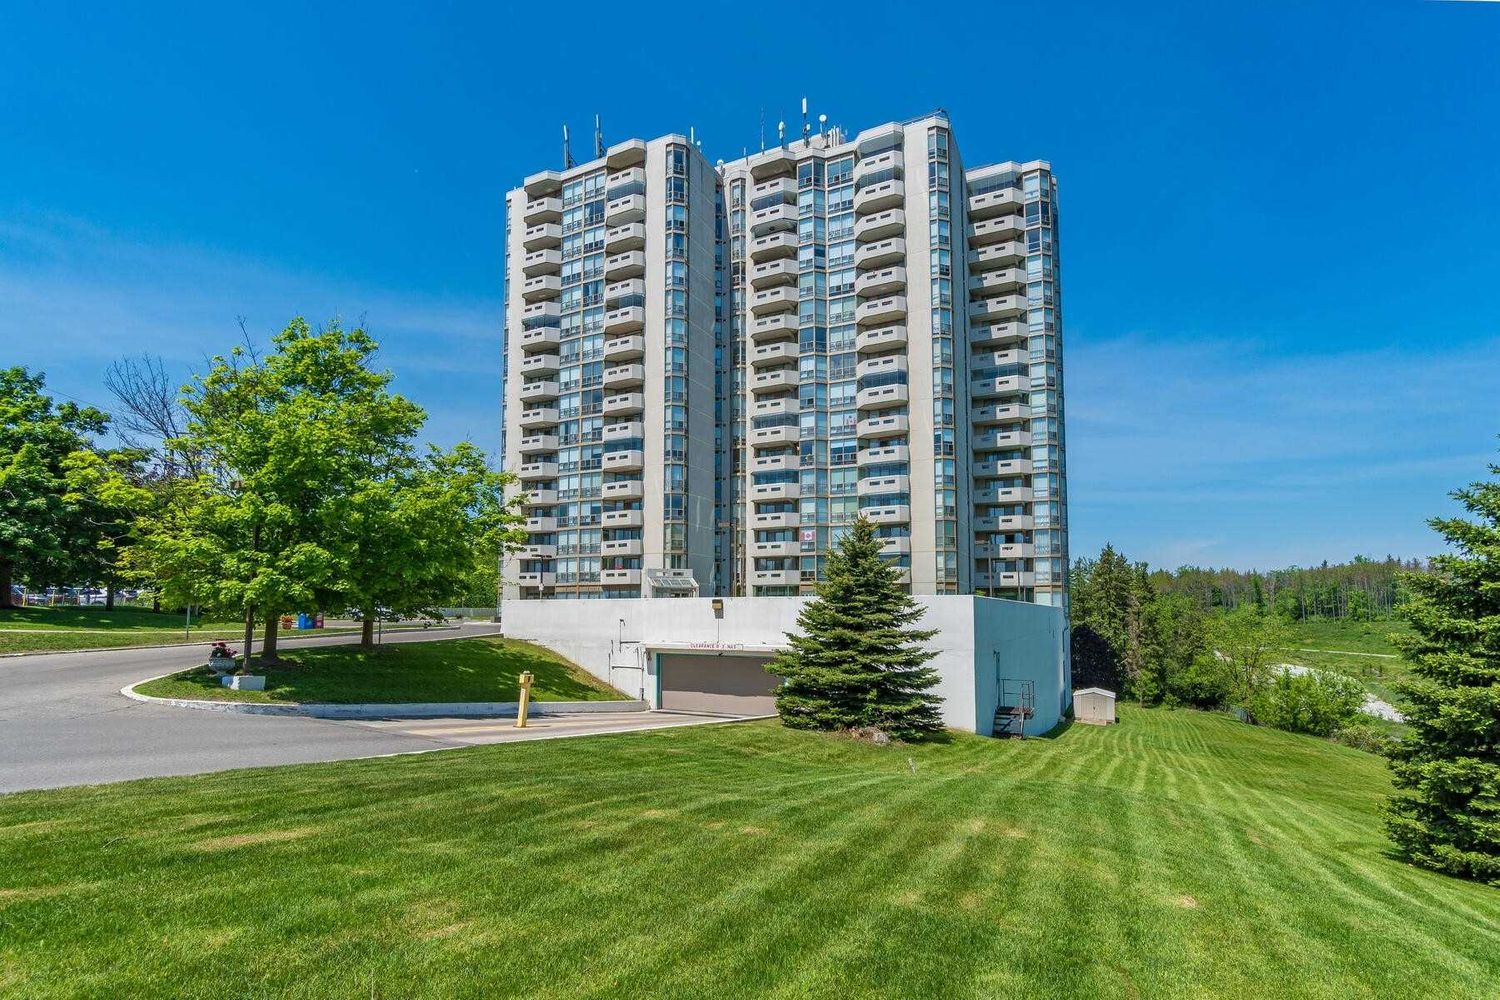 20 McFarlane Drive. The Sands Condos is located in  Halton Hills, Toronto - image #1 of 3